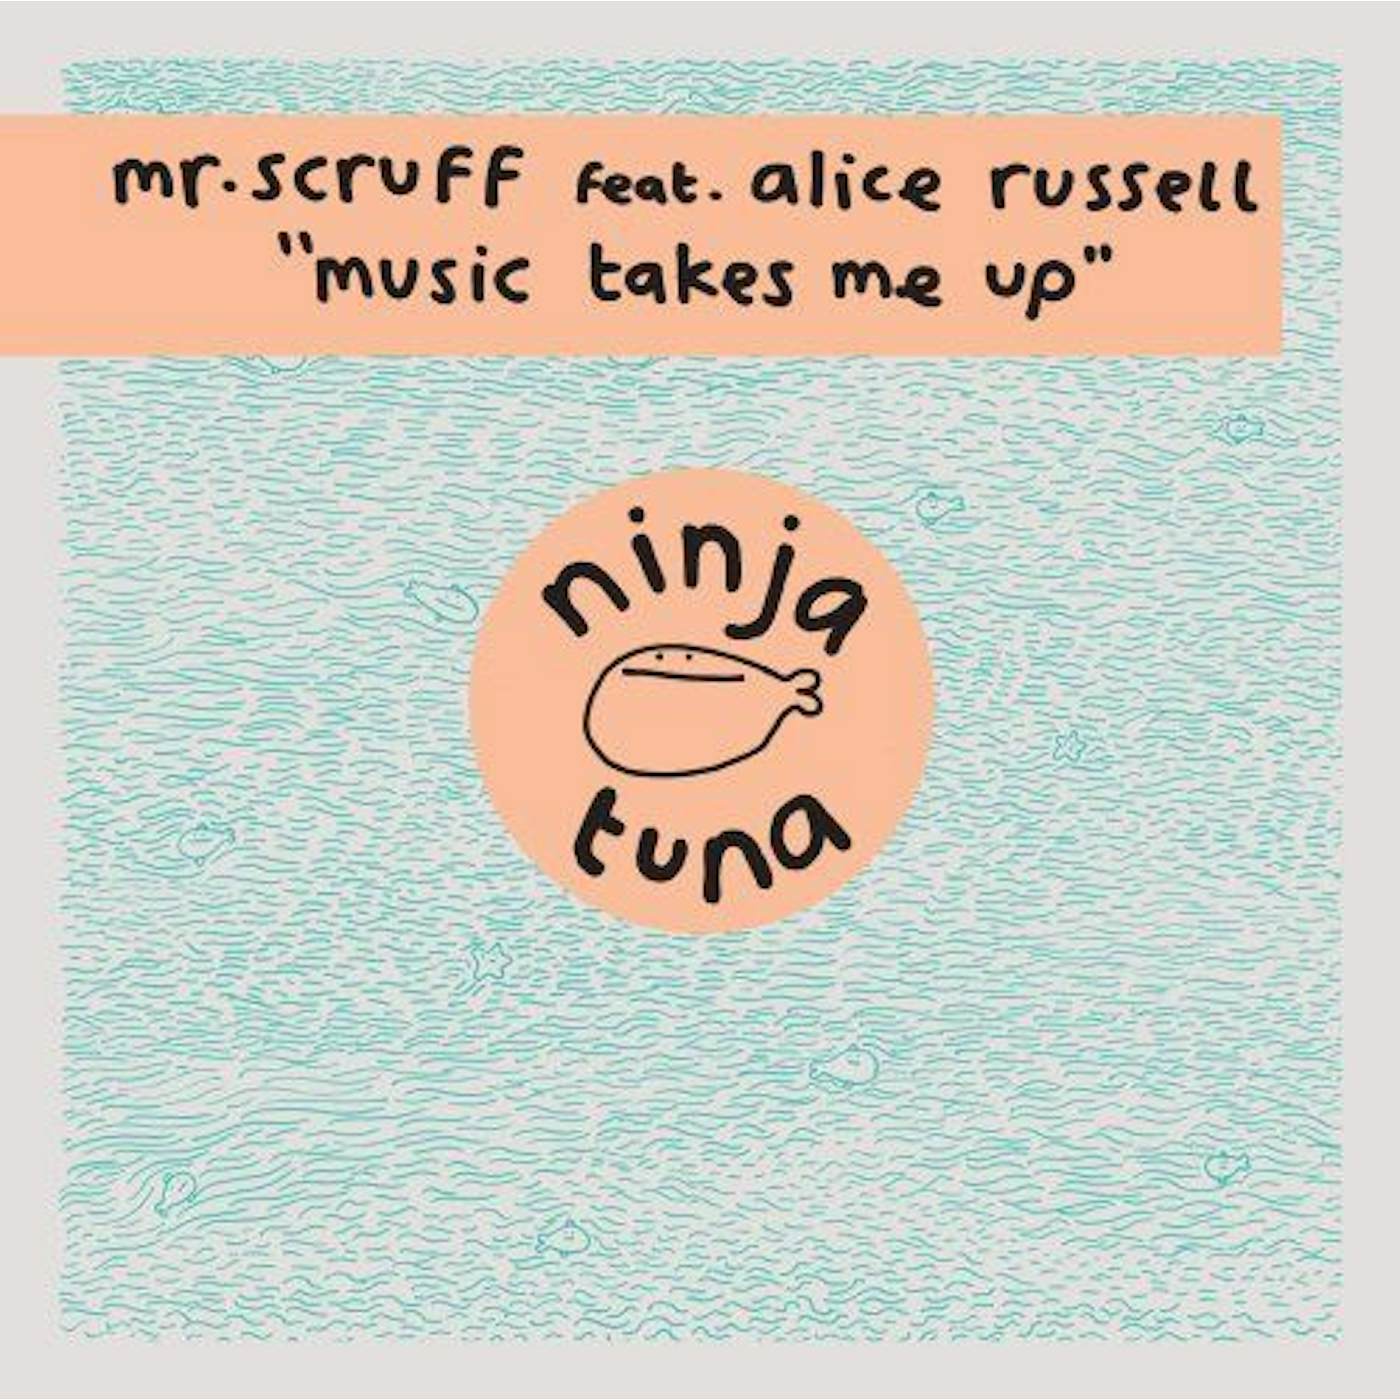 Mr. Scruff Music Takes Me Up   12 Inch Vinyl Record